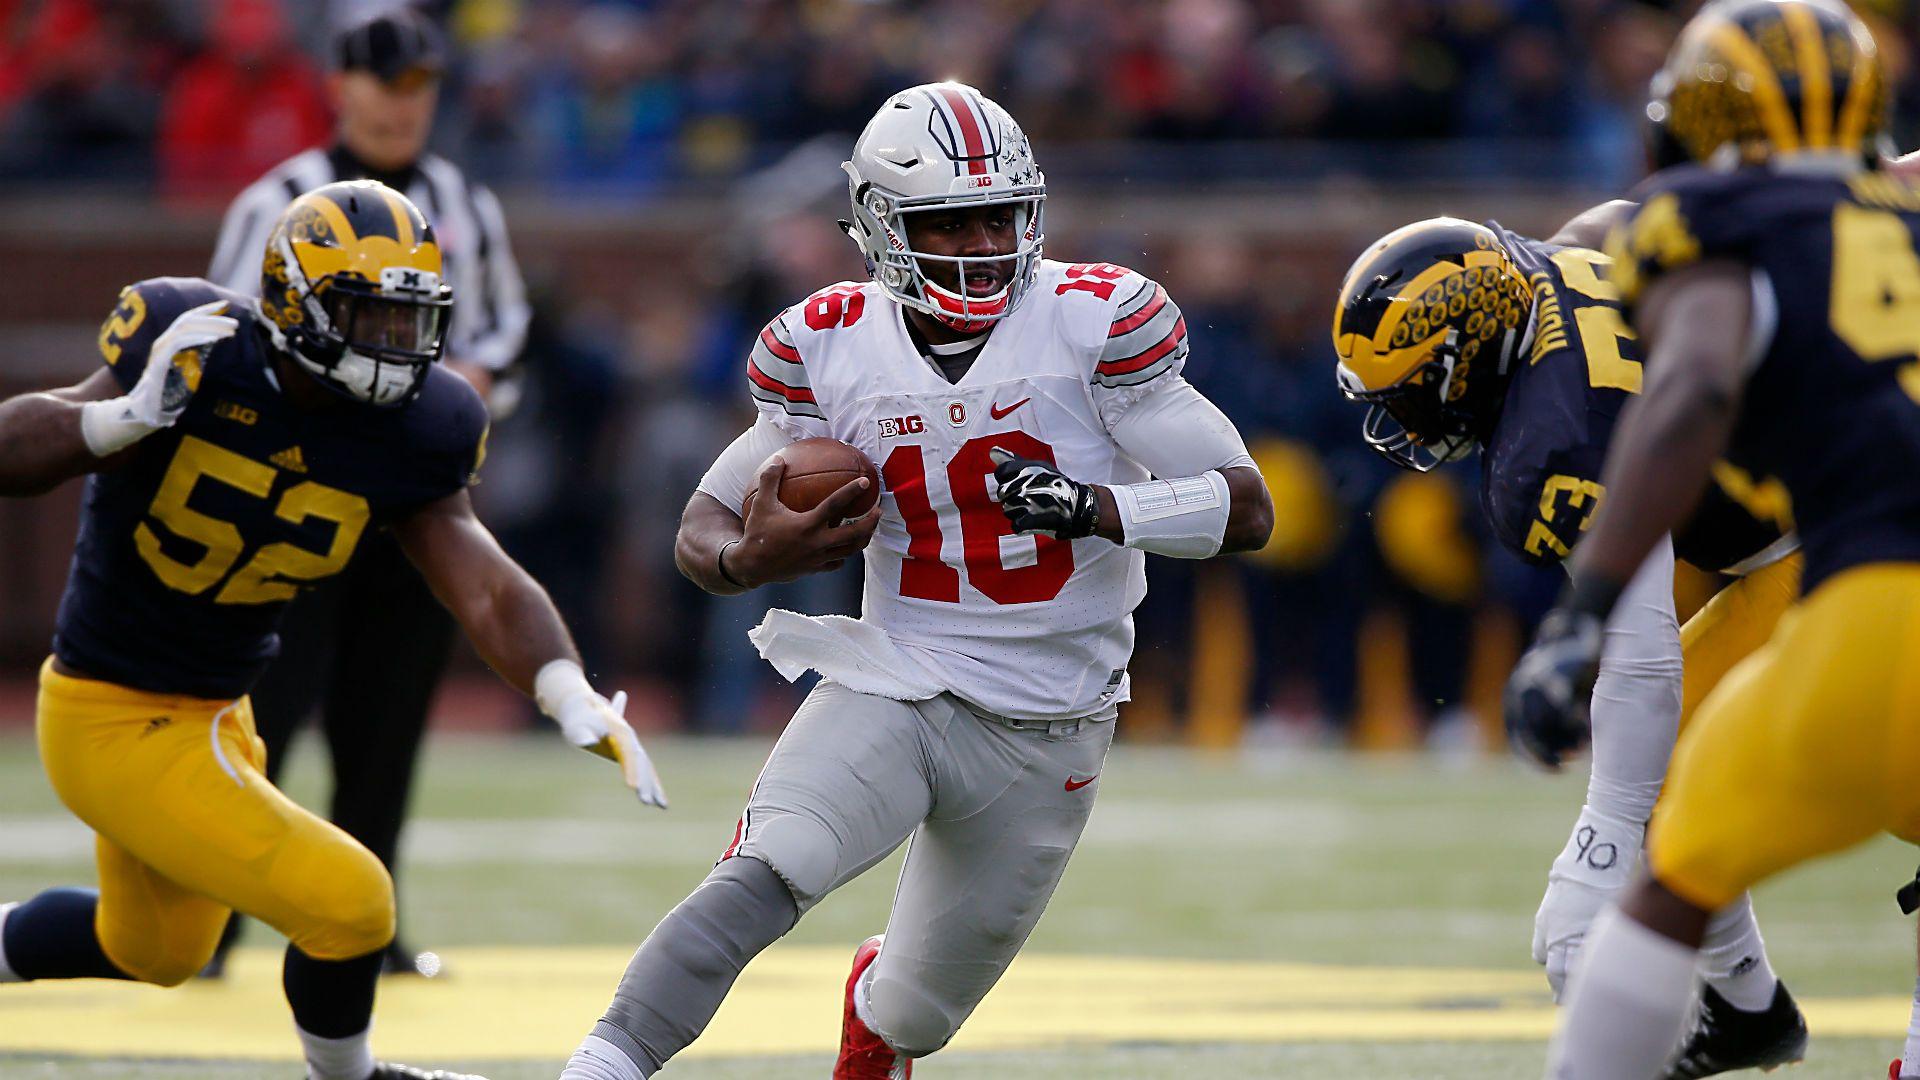 It's J.T. Barrett's time to finish the mission at Ohio State. NCAA